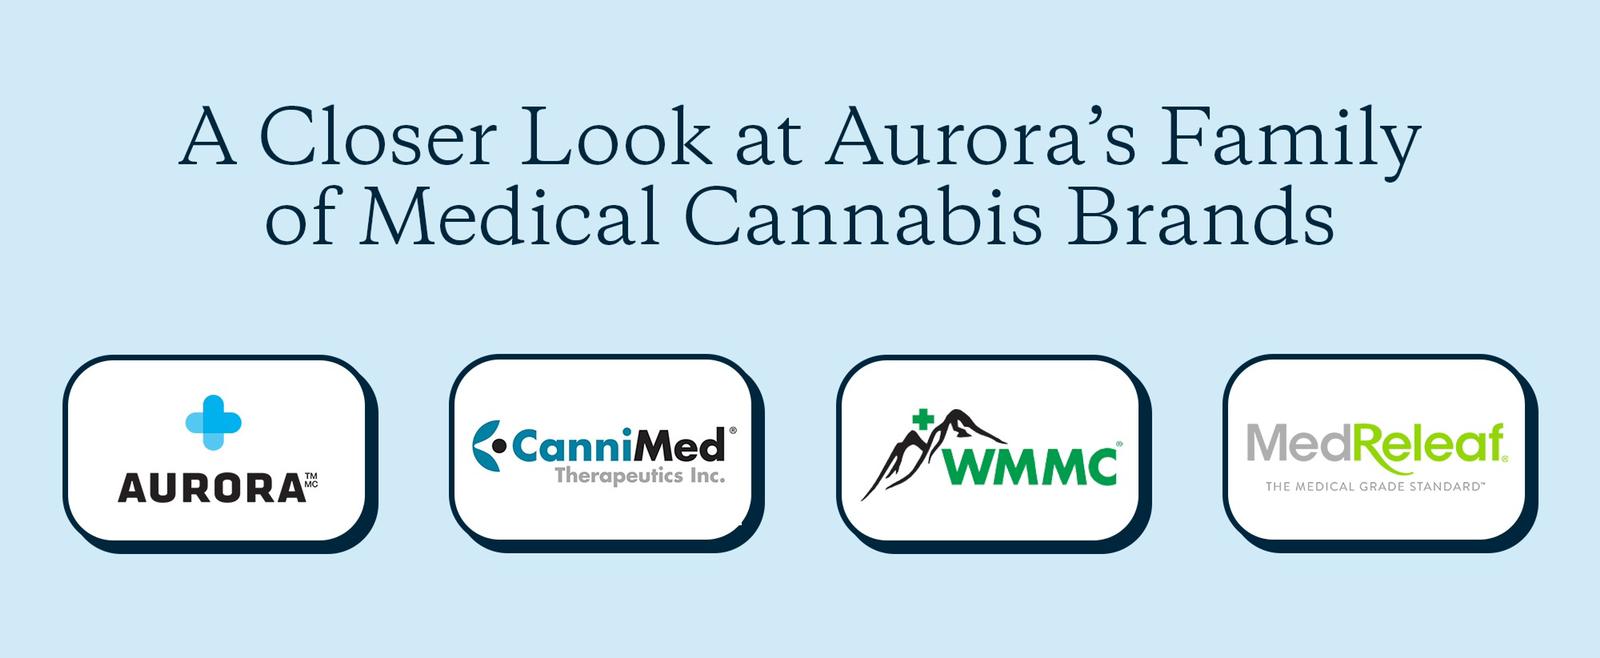 A Closer Look at Aurora's Family of Medical Cannabis Brands